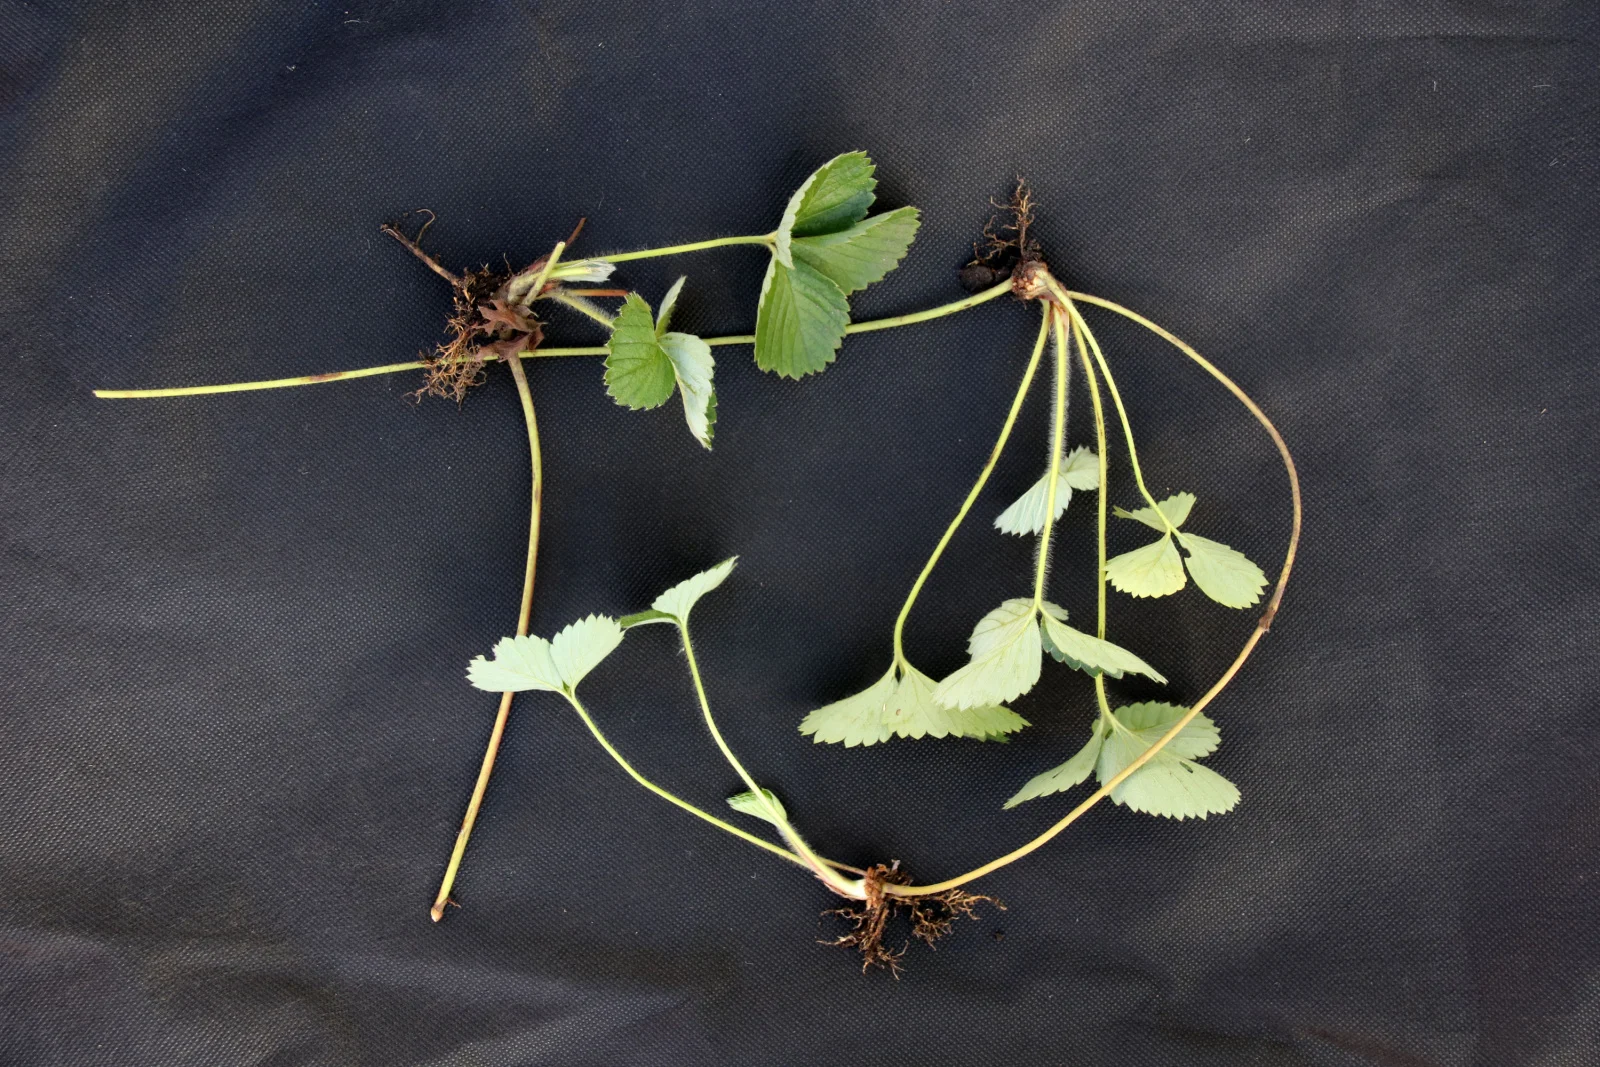 strawberry runners with developed root system prepared for a cutting off and planting